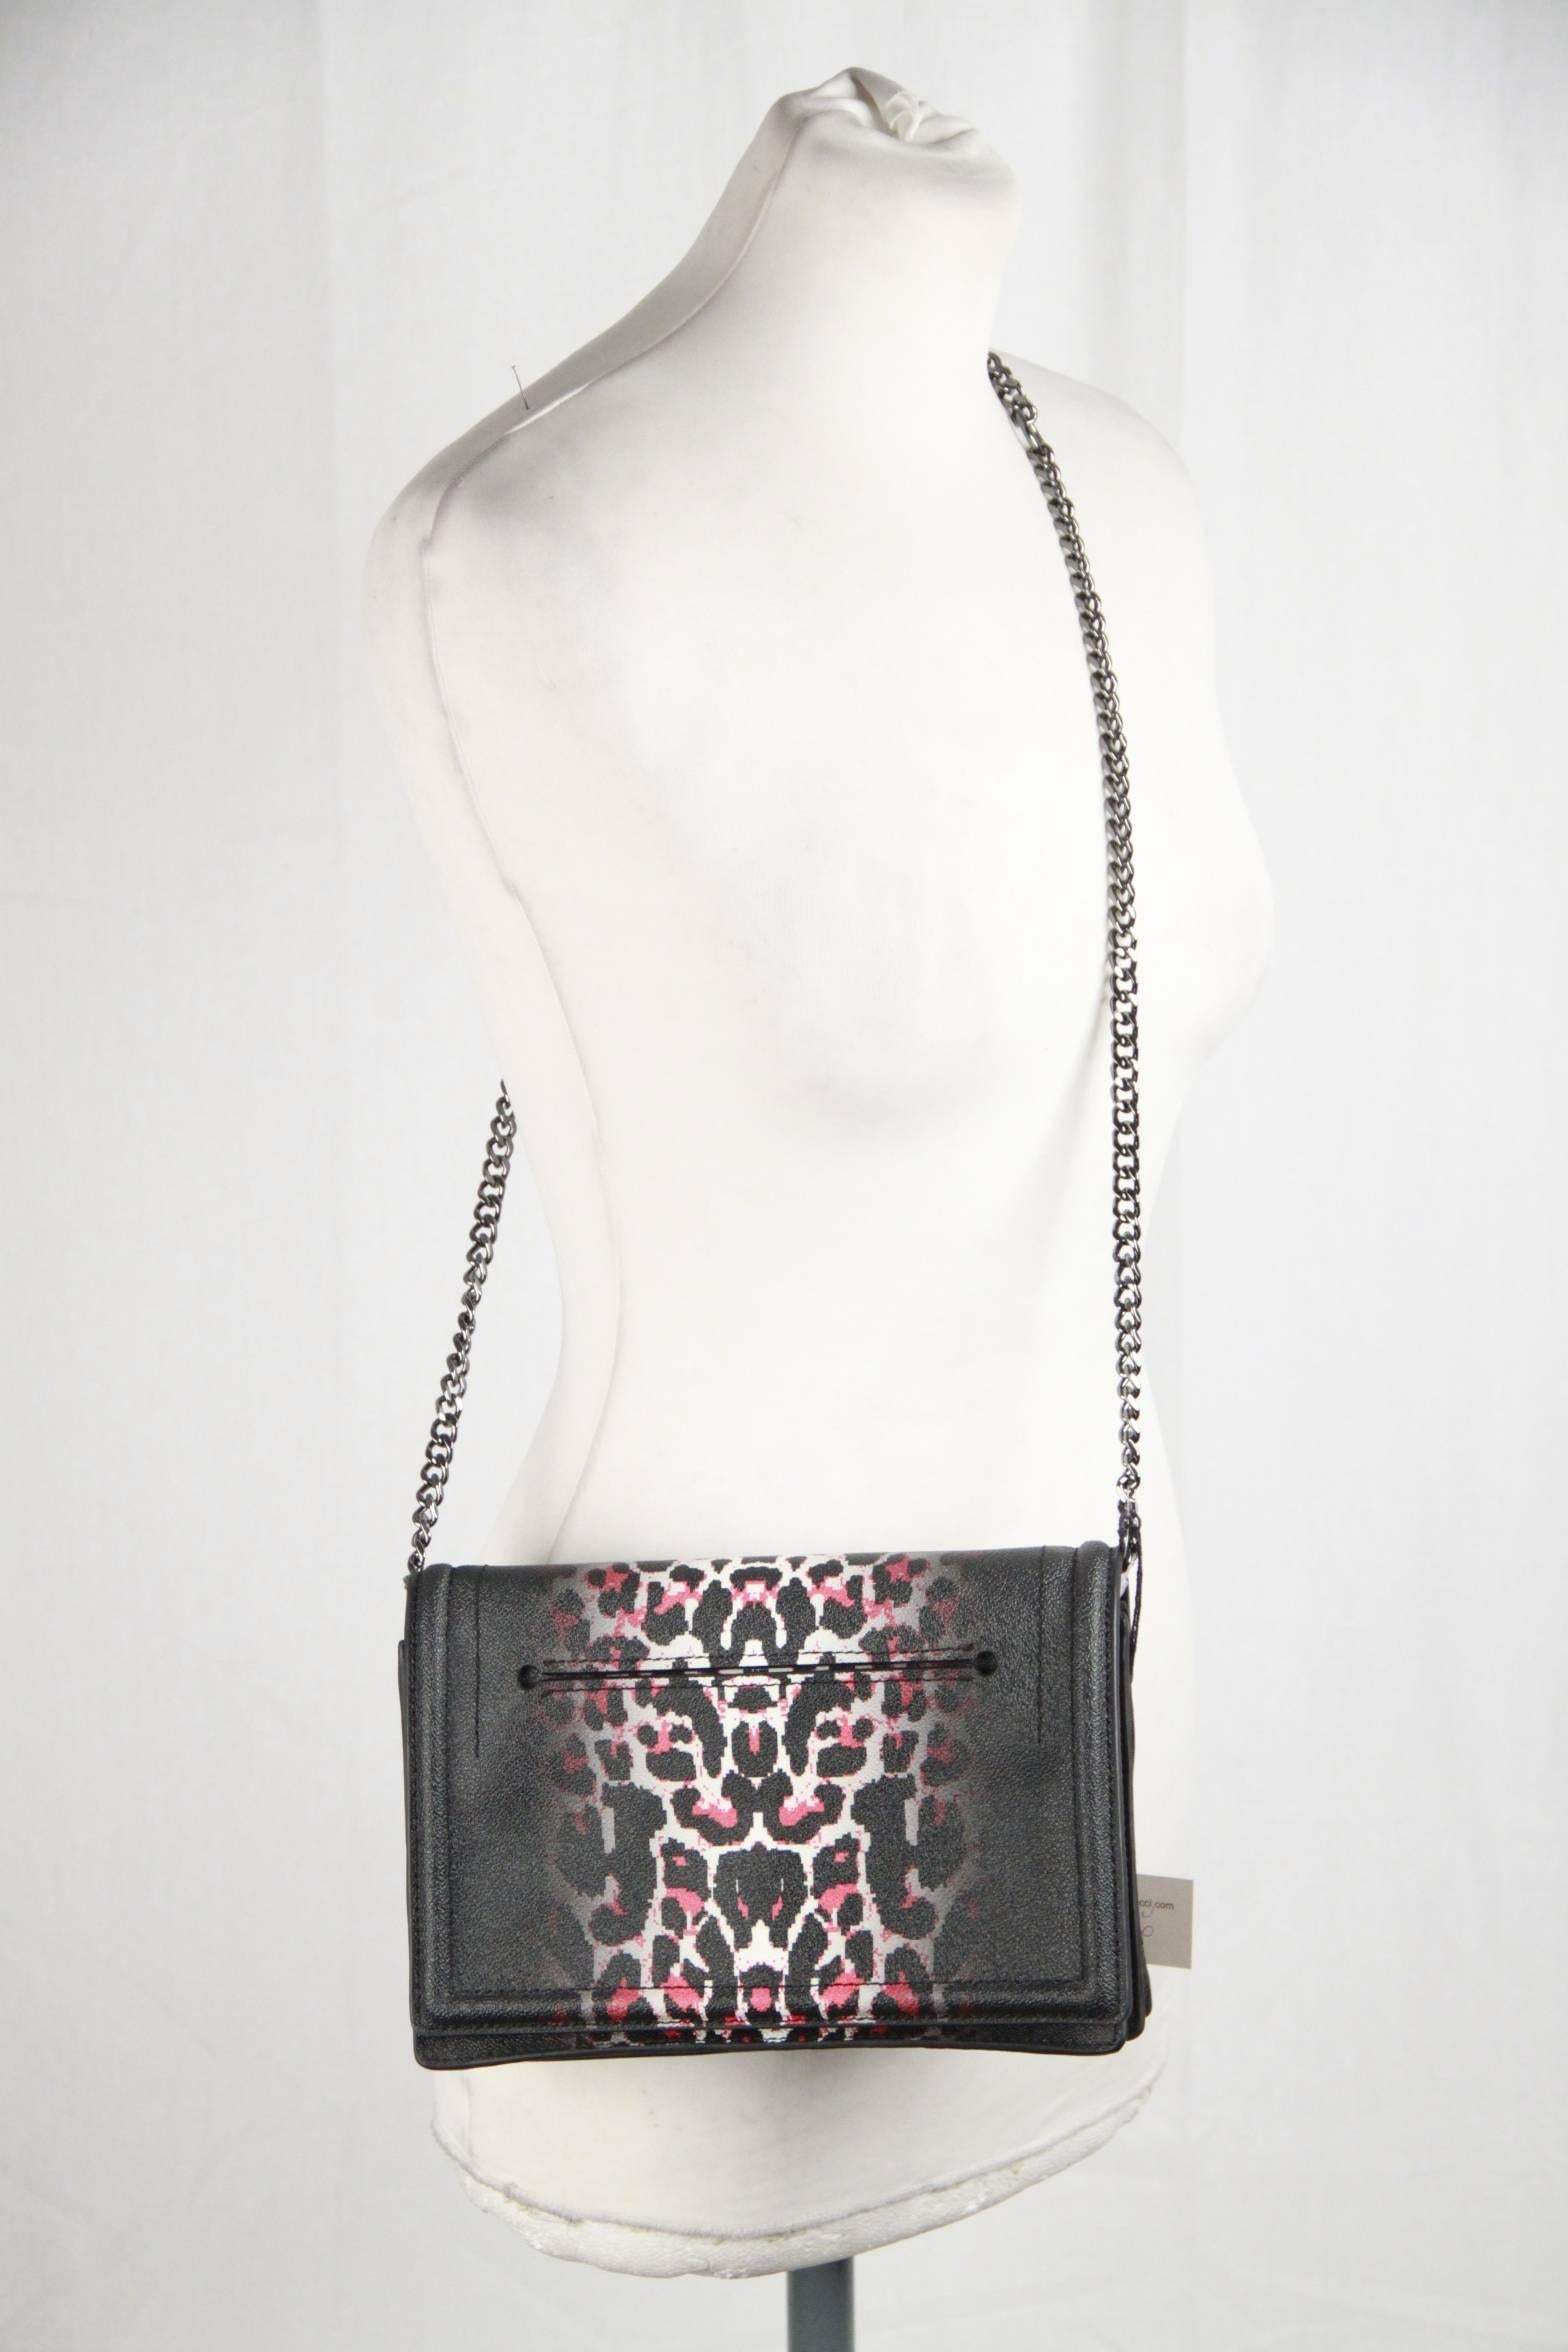 - McQ Alexander McQueen's 'Simple Fold' shoulder bag
- From the Pre-Fall '14 collection
- Red, black and white textured canvas
- Patterned with a cool digitized leopard print
- Flap with magnetic button closure
- 1 side zip pocket inside
- Gunmetal